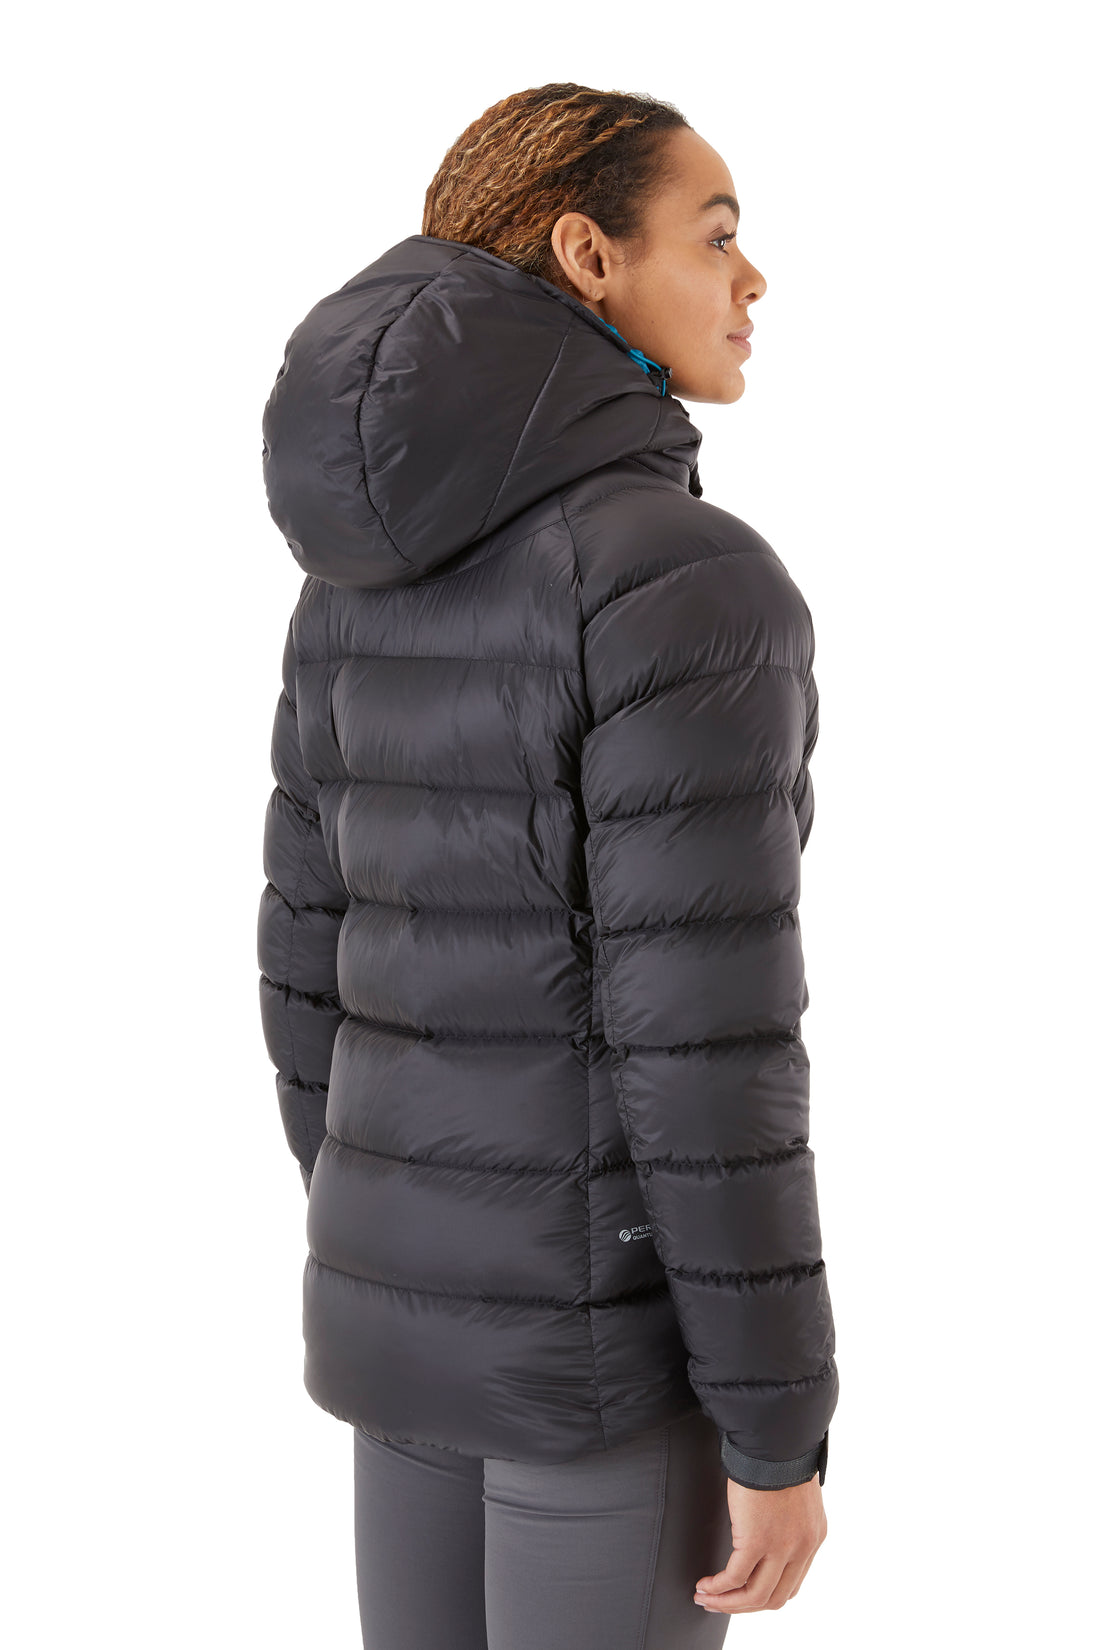 Axion Pro Down Jacket - Anthracite